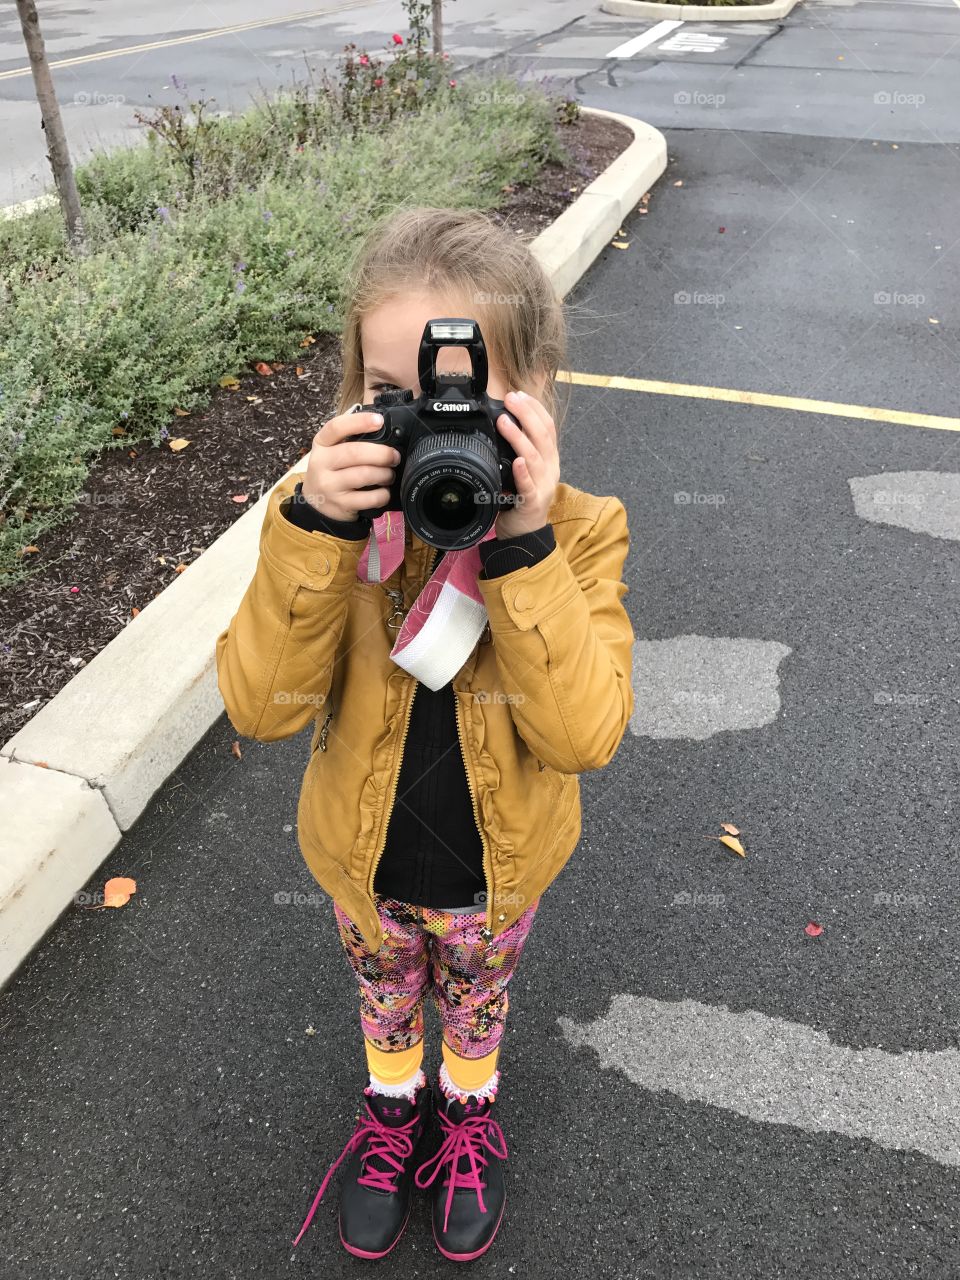 Never too young to learn photography 